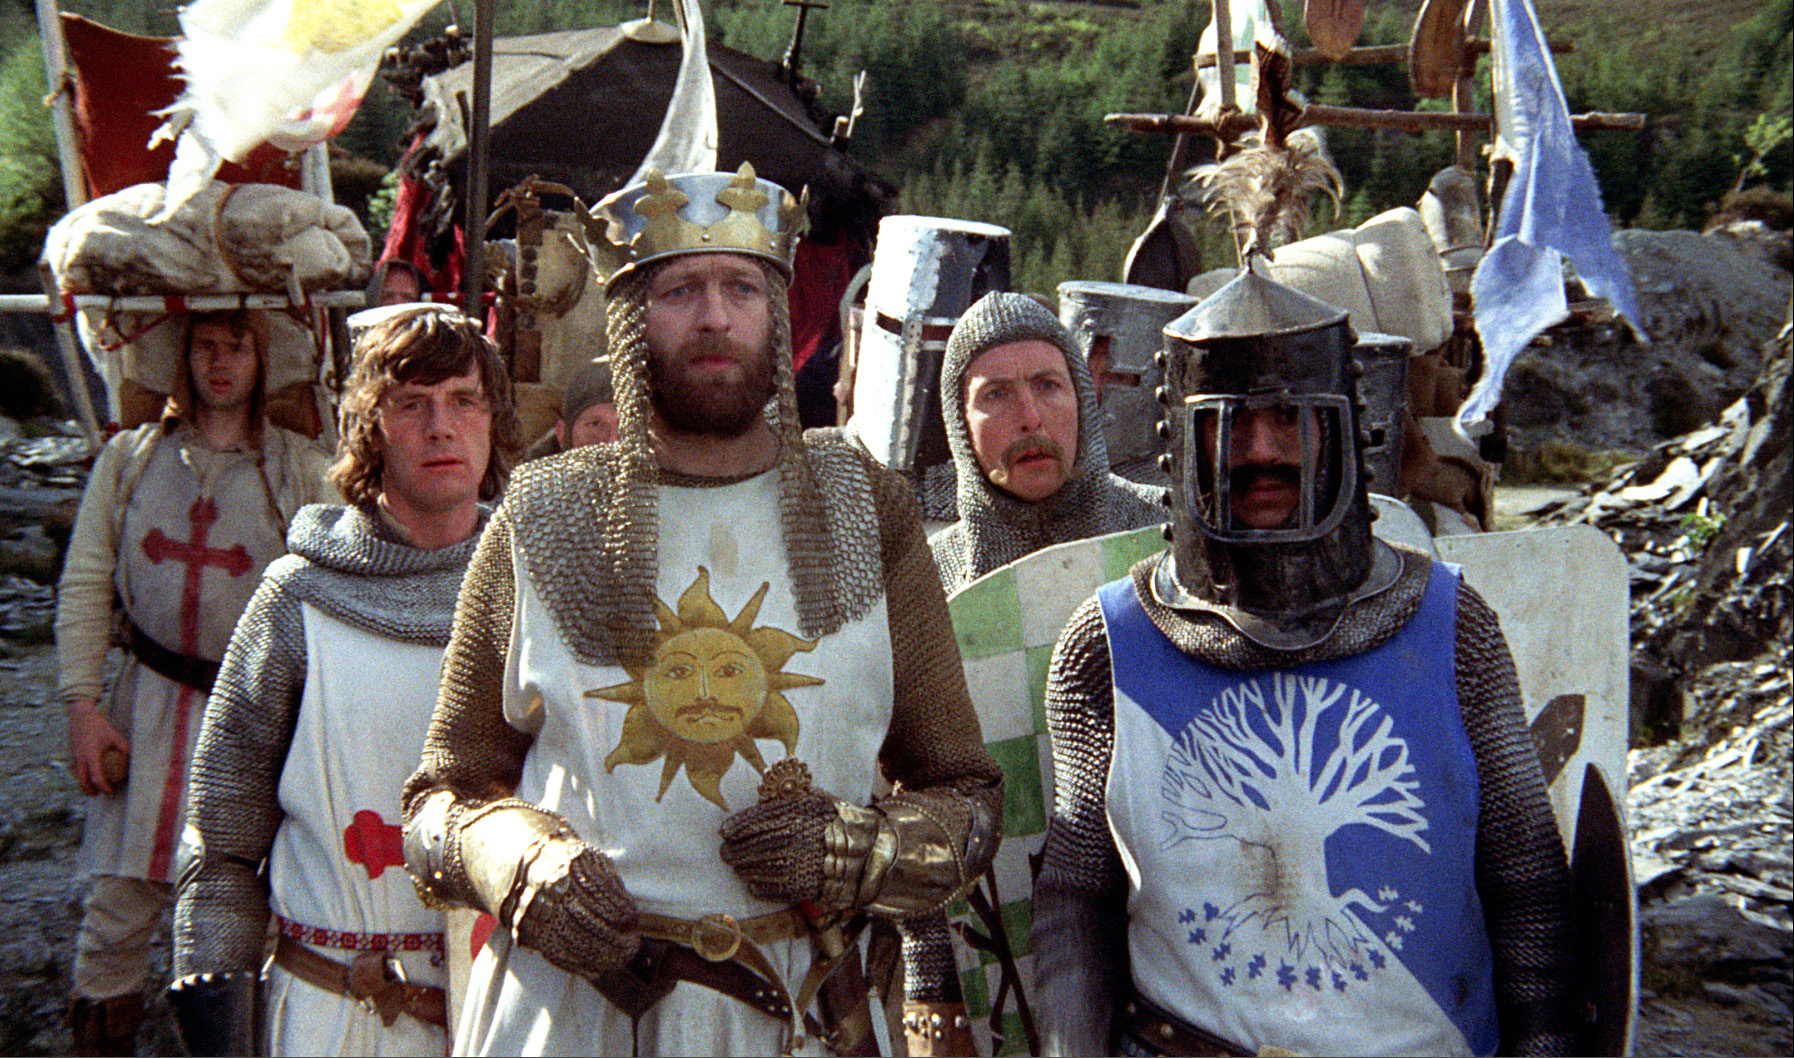 The Best Comedy Fantasy In Cinema History Is Streaming On Netflix - TOI ...